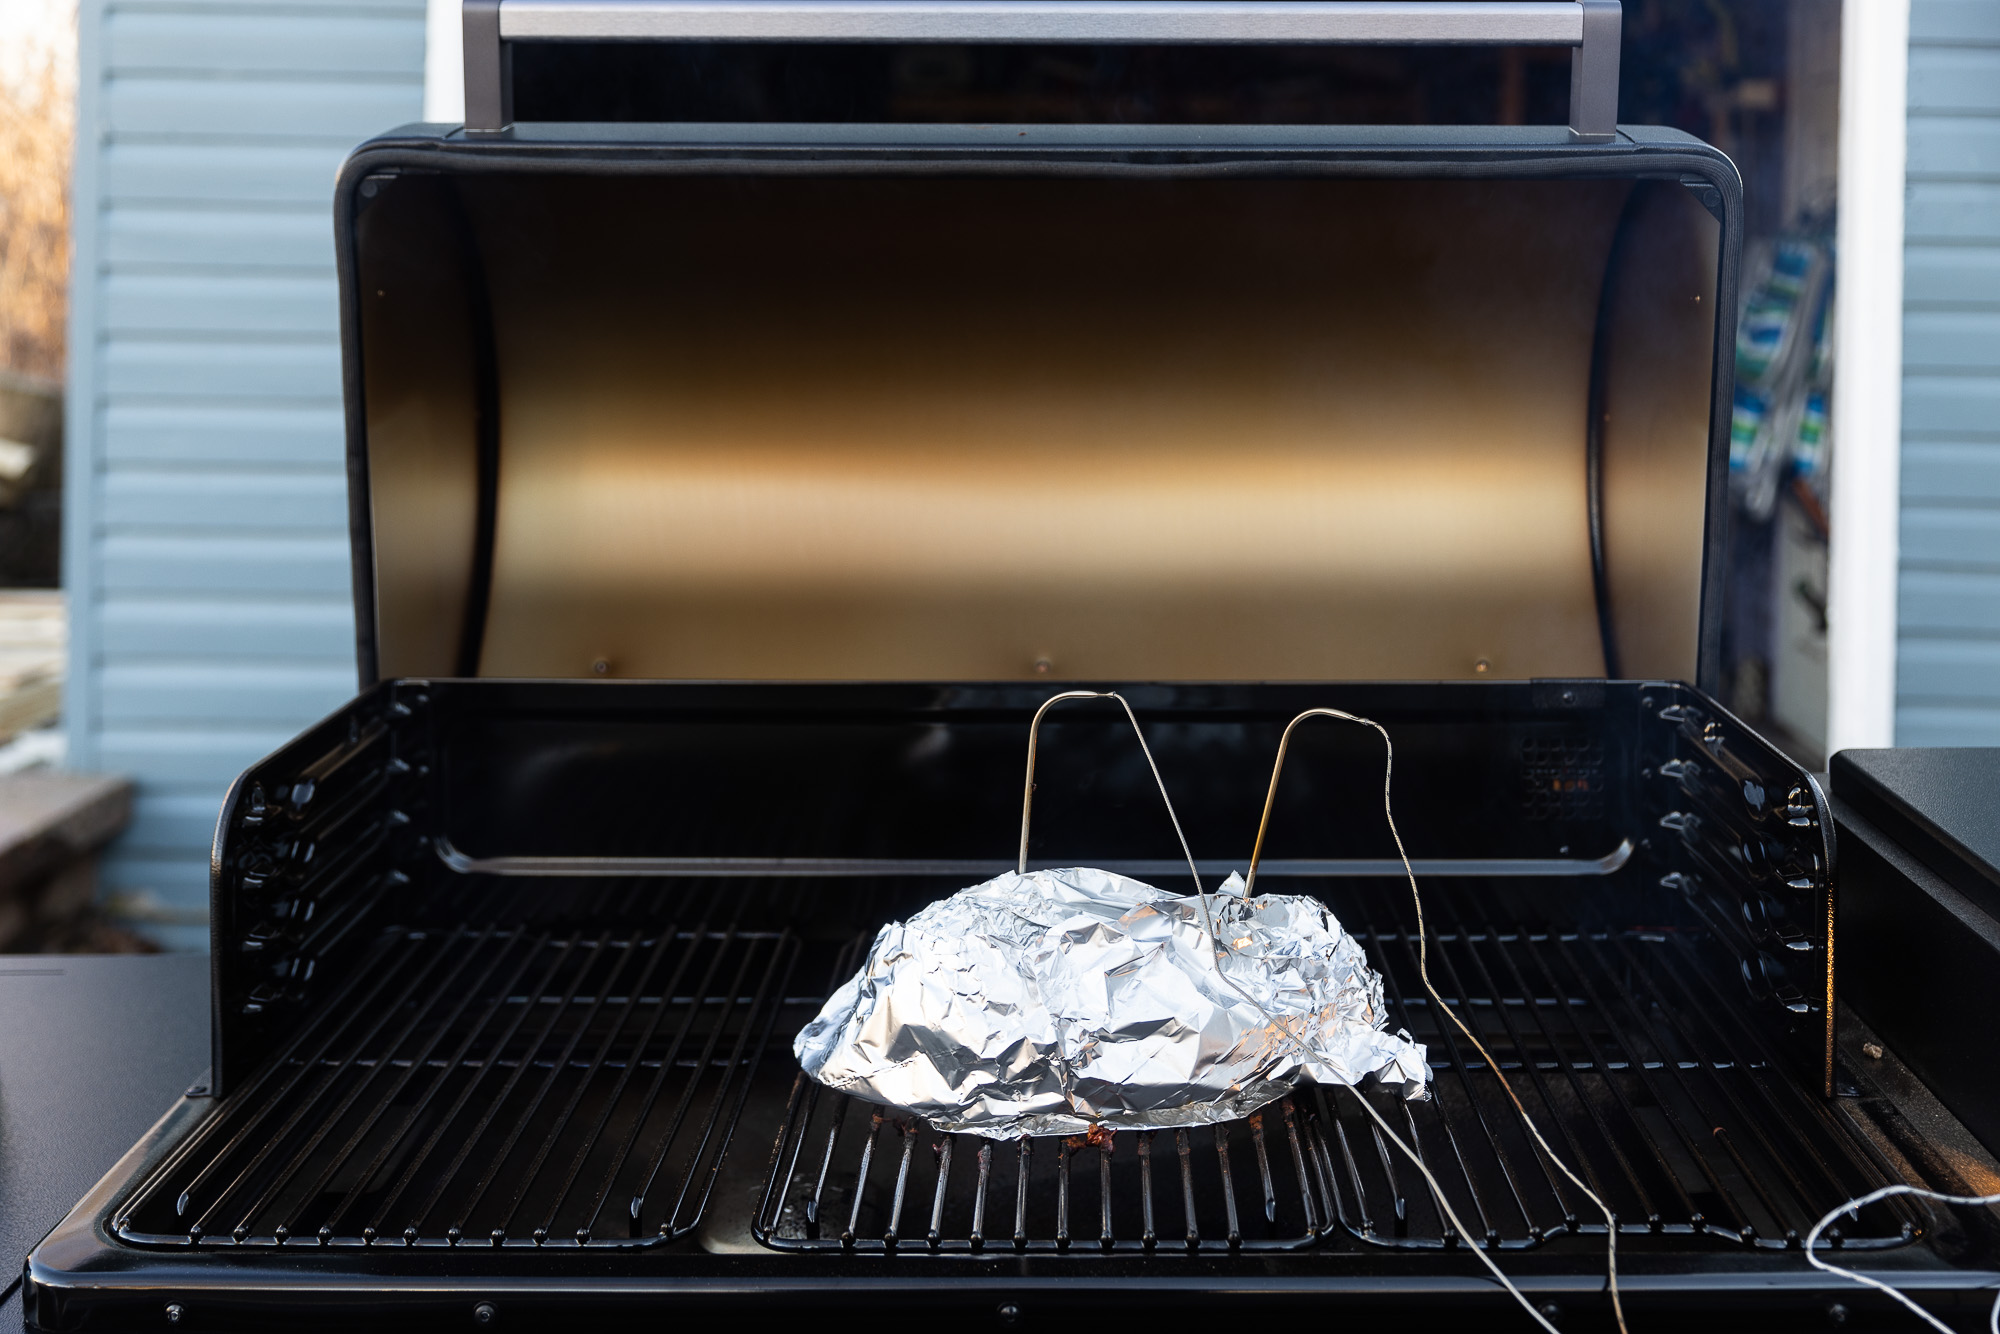 Built In Traeger Grill: How-To Guide & Your 3 Best Options